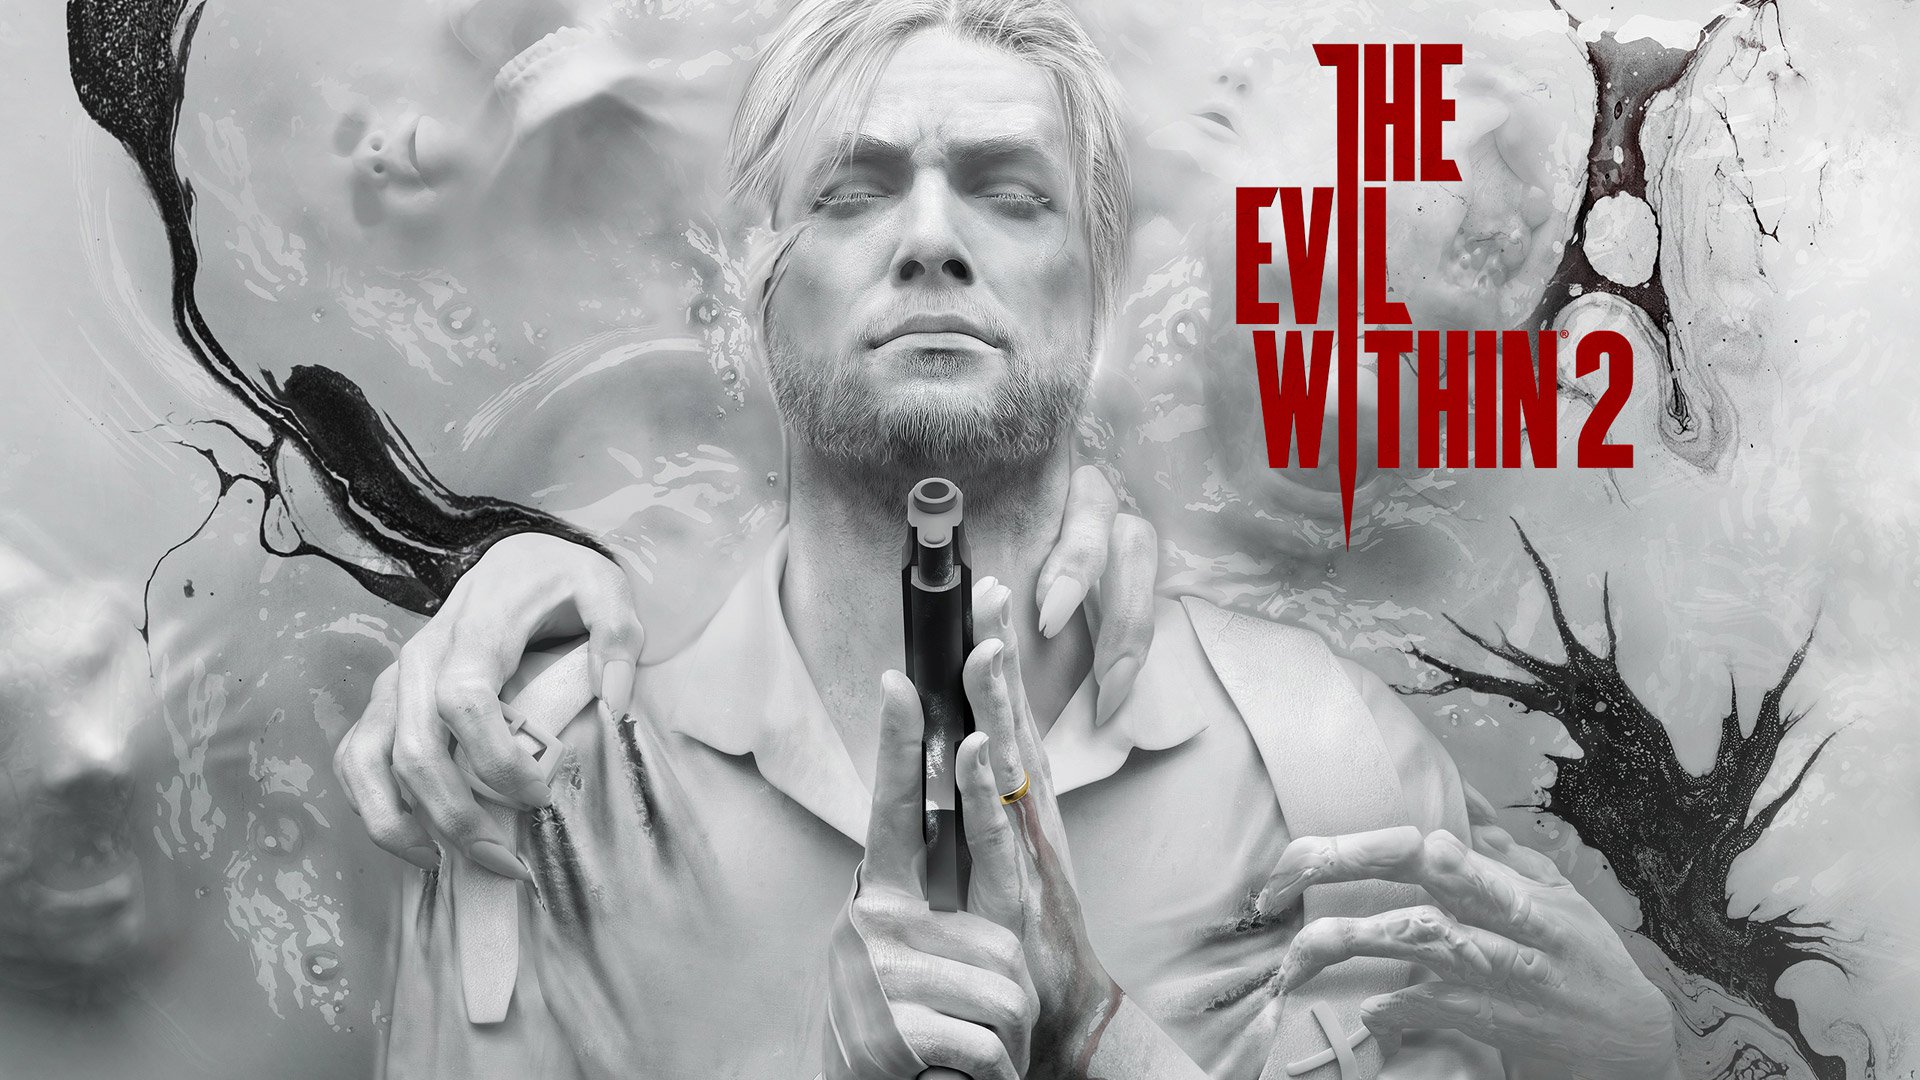 A free trial of The Evil Within 2 is now available on Steam